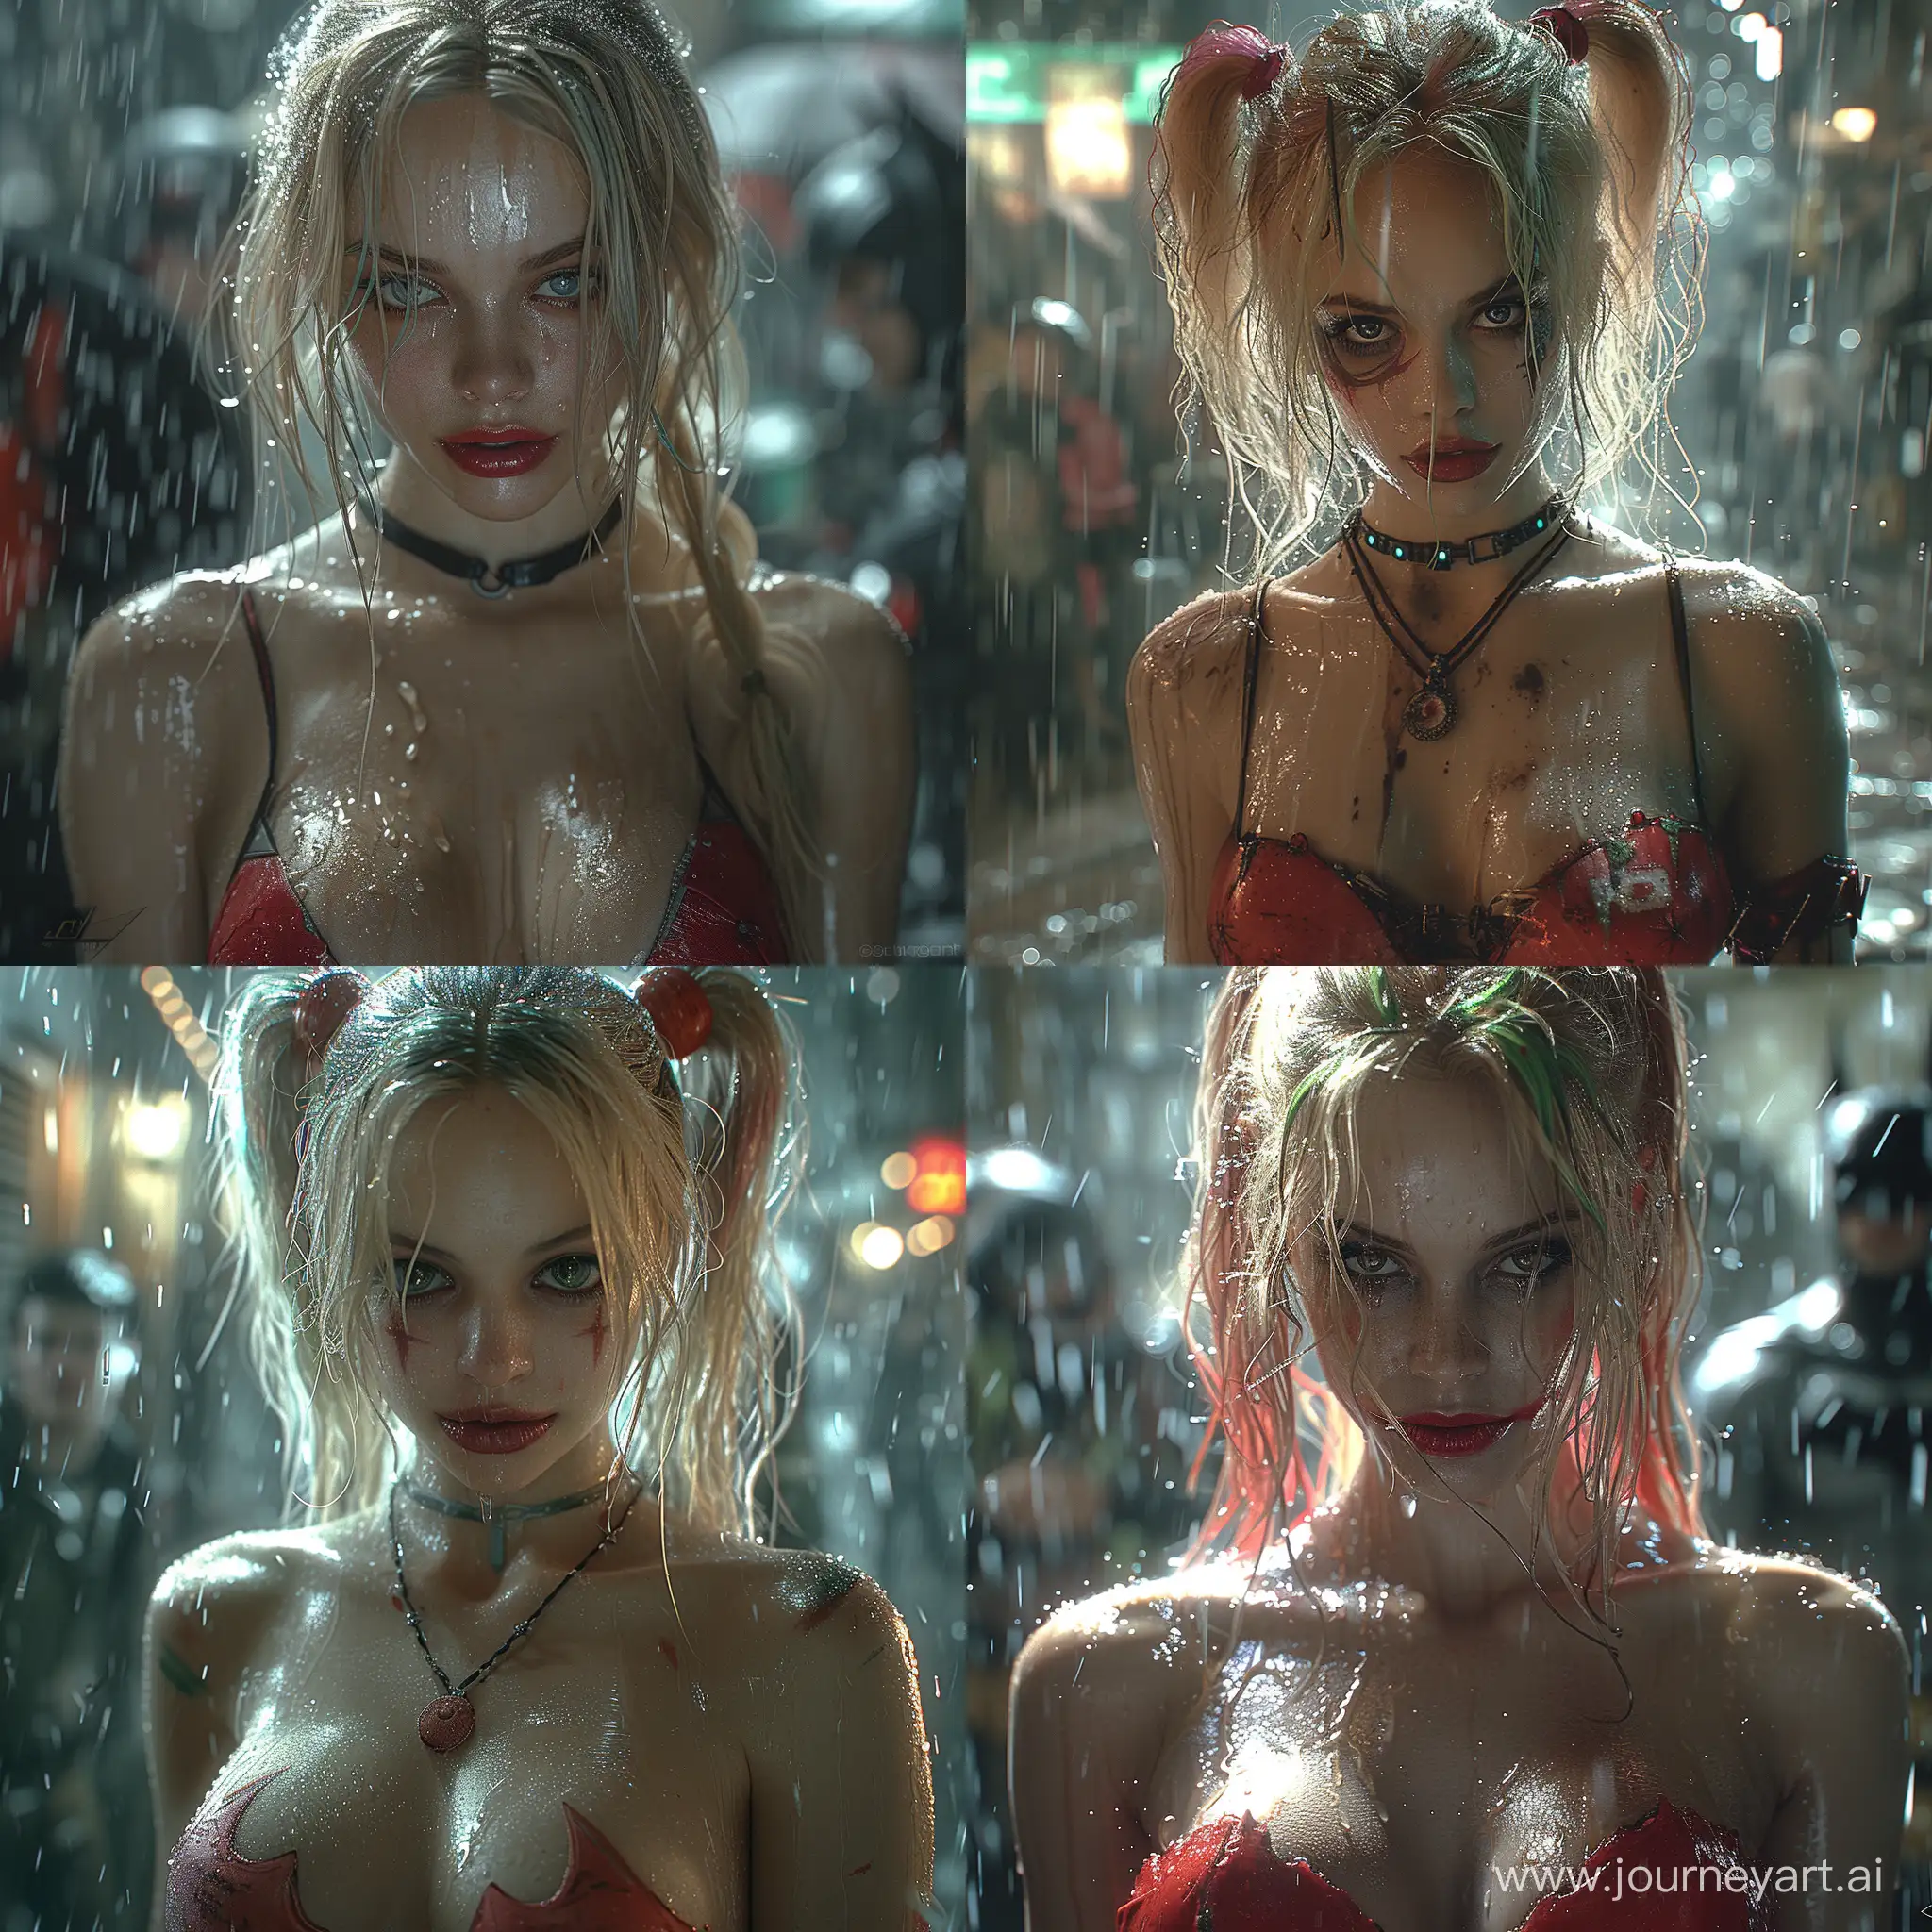 Create a realistic and dynamic image of the harley quinn in Gotham City, with a close-up depth of field, set in the rain. The image should capture the essence of Gotham City's atmosphere and the harley quinn's character, incorporating a stylized approach. Pay attention to detail and realism, and ensure that the image conveys a sense of drama and intrigue --stylize 750 --v 6